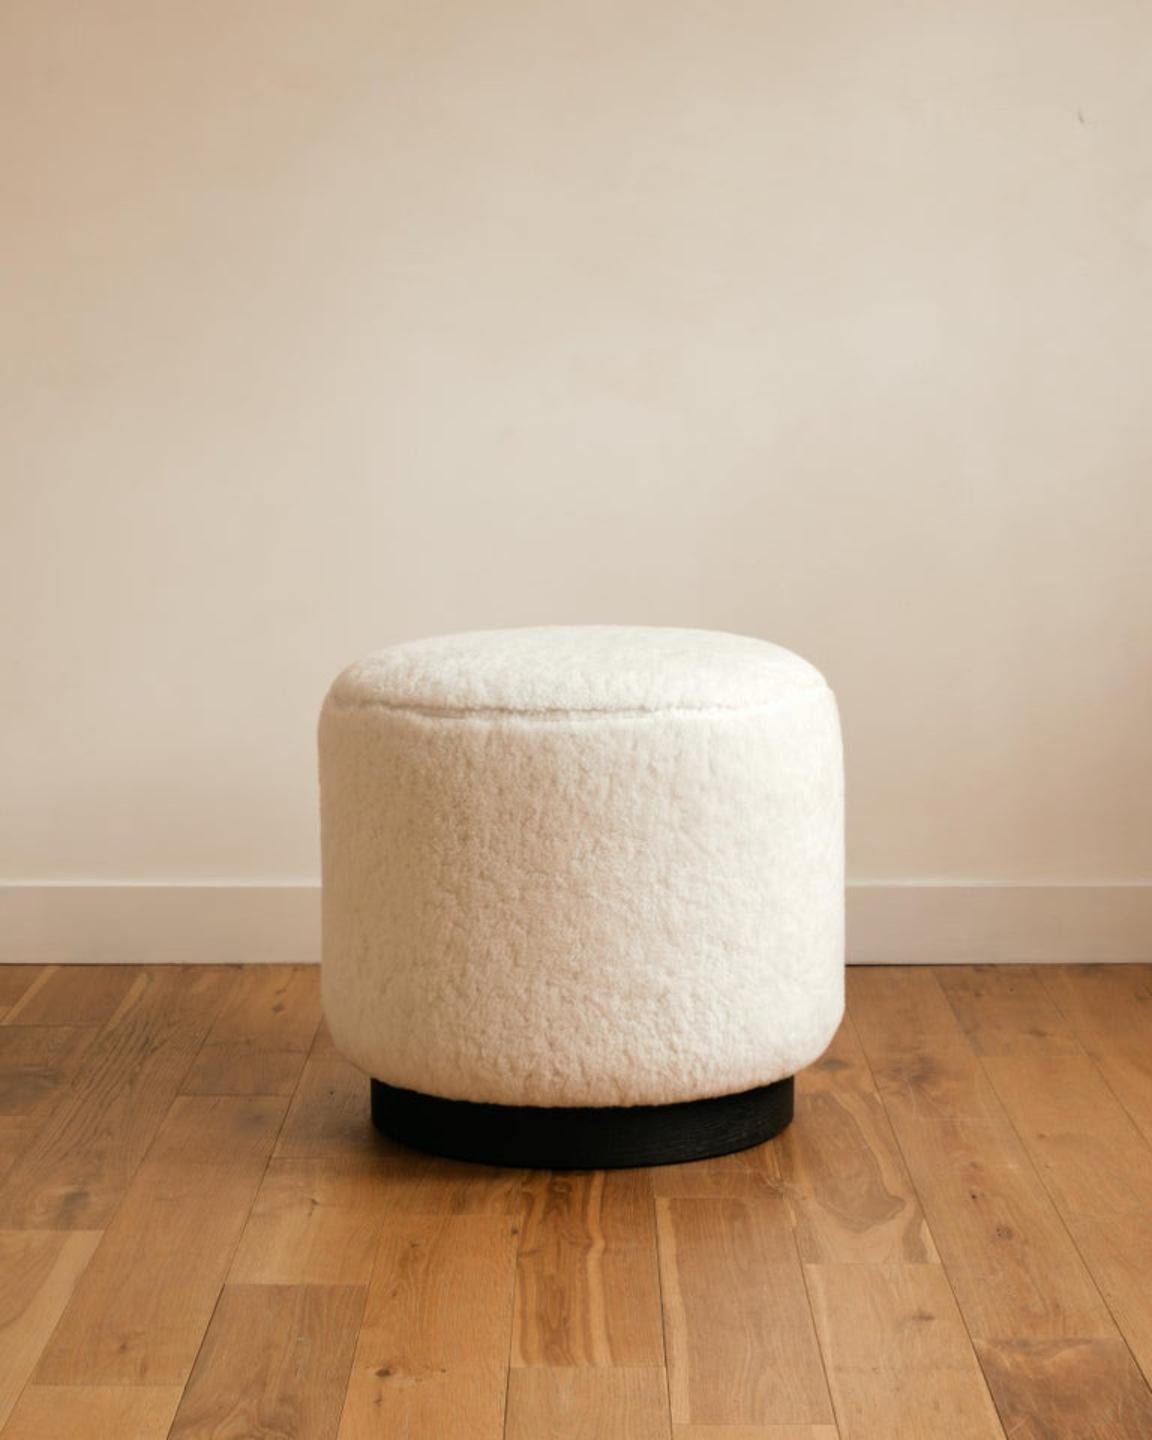 Sorrento Ottoman  by Studio Sam London
Dimensions: ⌀ 52 x H 47 cm
Materials: Sheepskin and Stained Timber Basel


Founded in London by its Creative Director Alessandra Melchiorri, Studio Sam creates furniture pieces with a unique identity.
Every